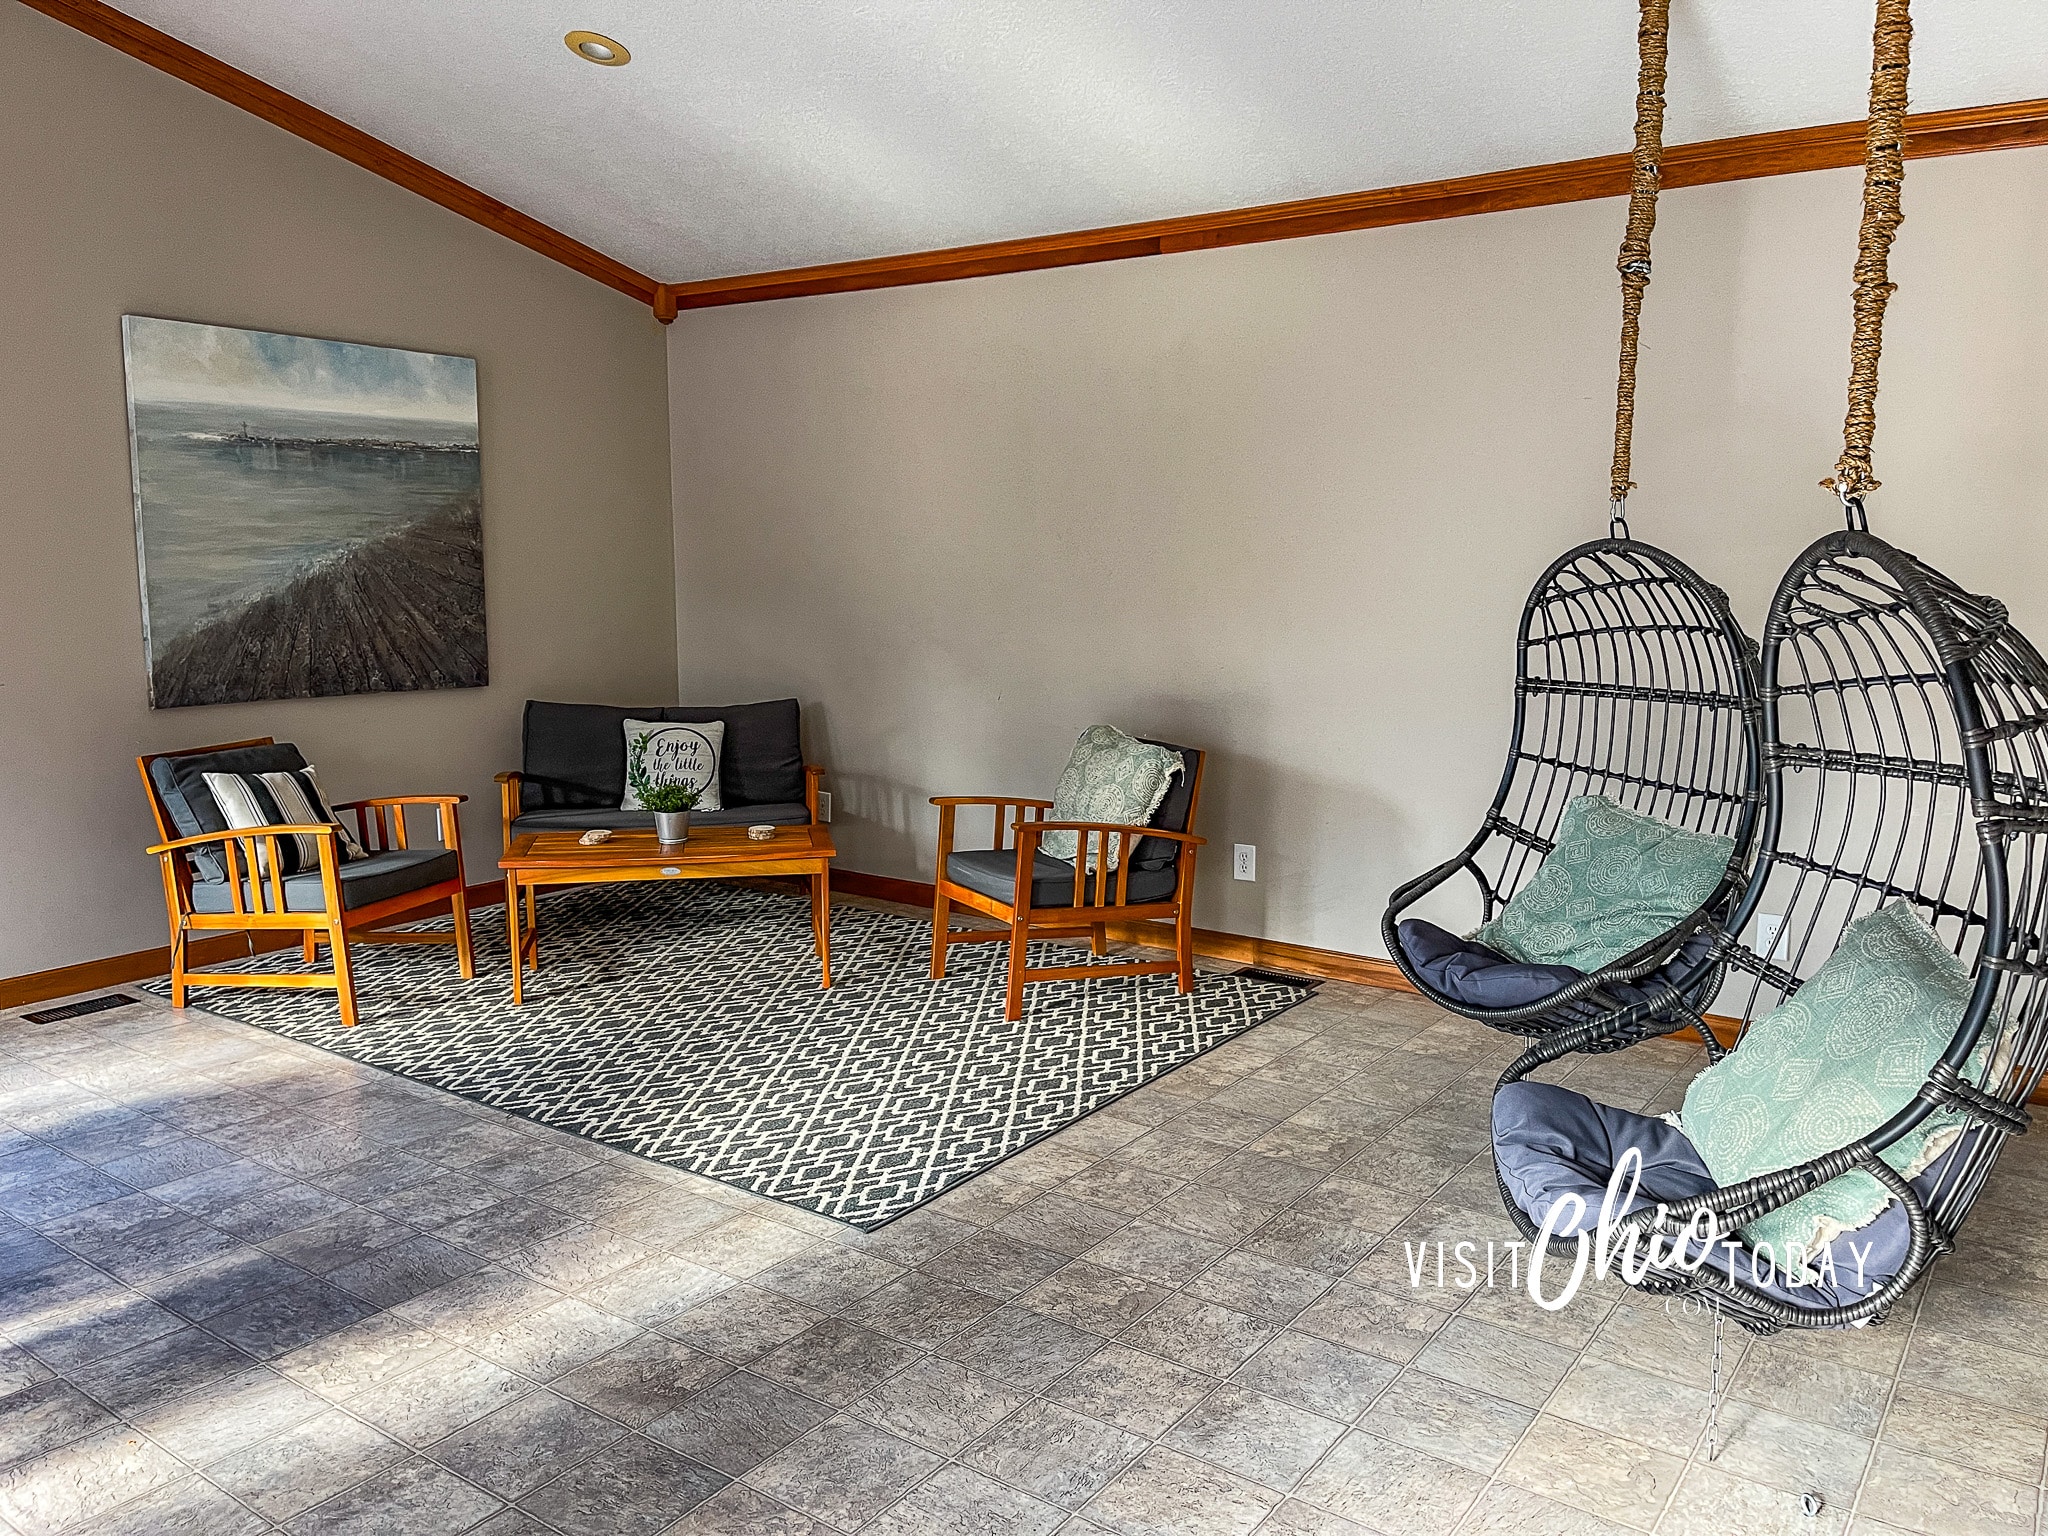 sunroom at woodlands lodge, showing two hanging chairs and a sitting area with an outdoor wooden couch, two chairs and a coffee table. Photo Credit Cindy Gordon of VisitOhioToday.com